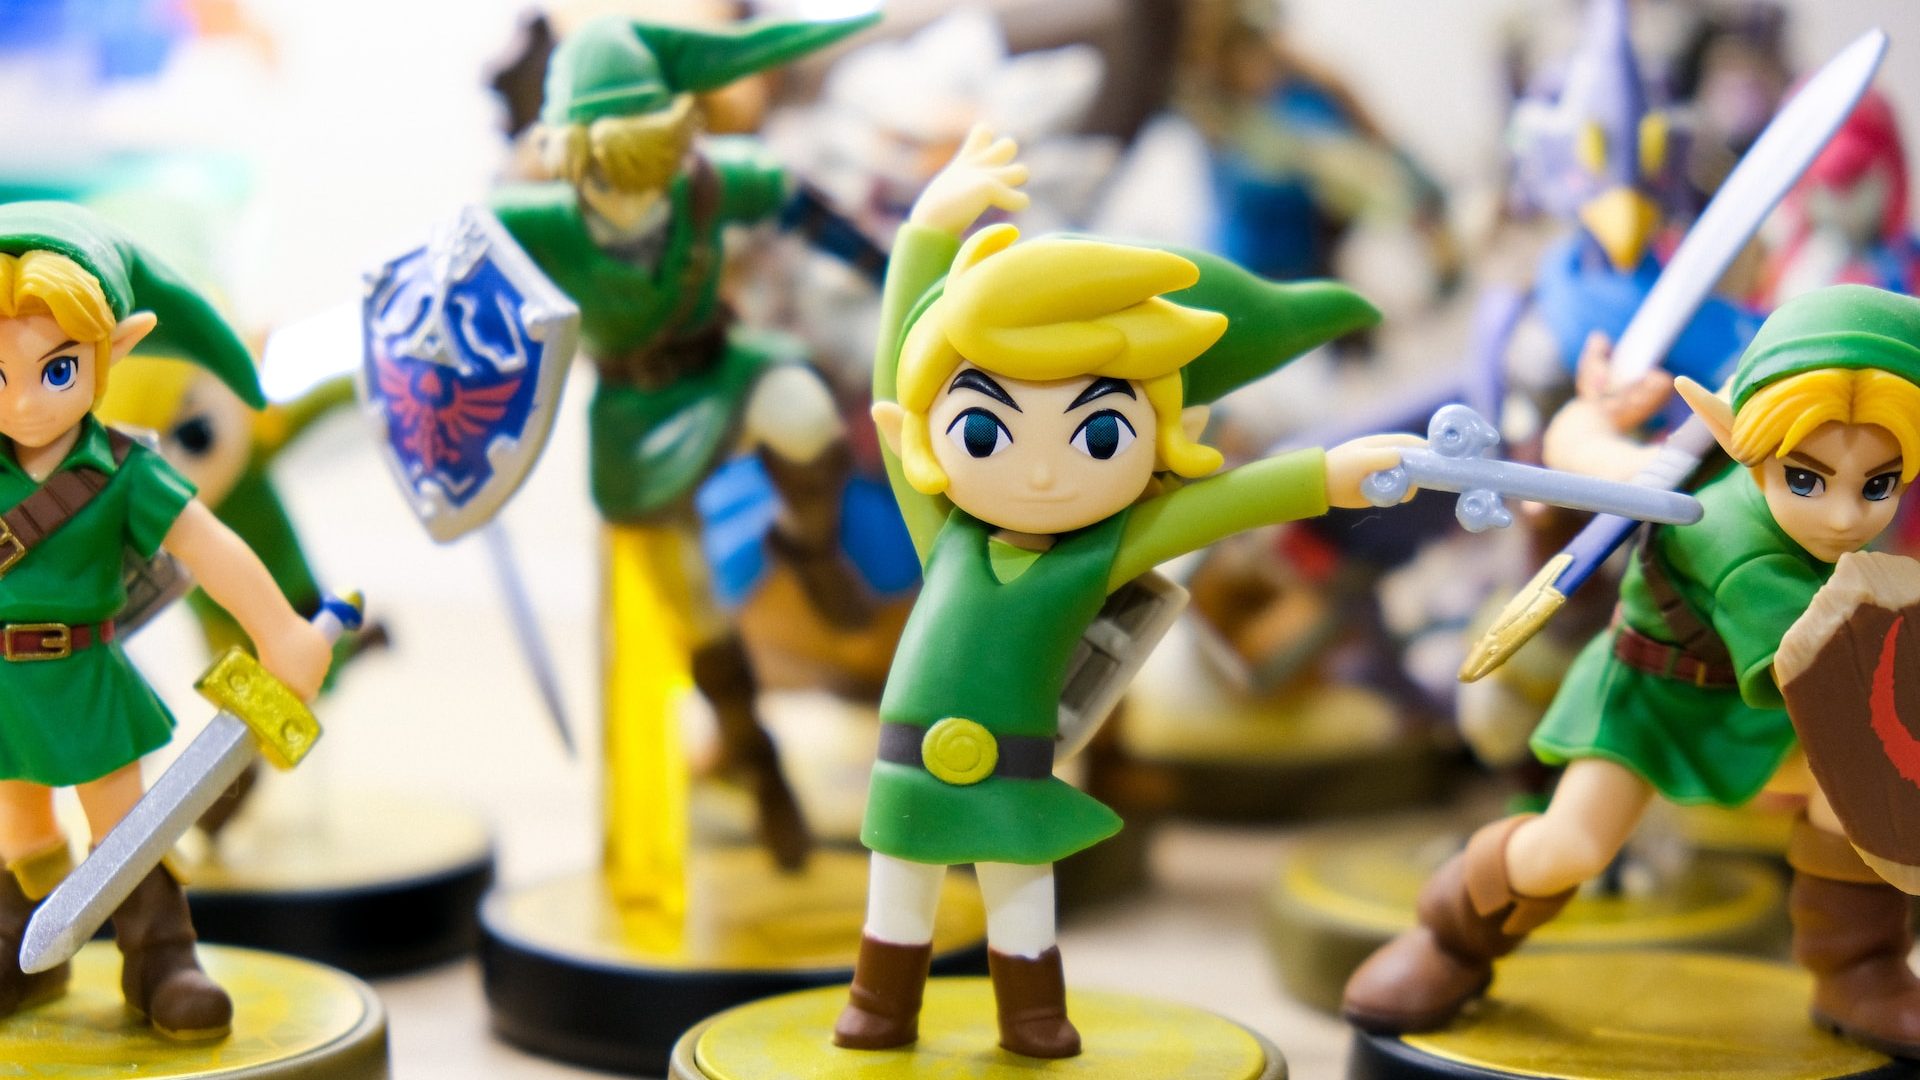 Nintendo amiibo toys of characters of Link from The Legend of Zelda Windwaker, Majors Mask, Ocarina of Time, and Super Smash Brothers